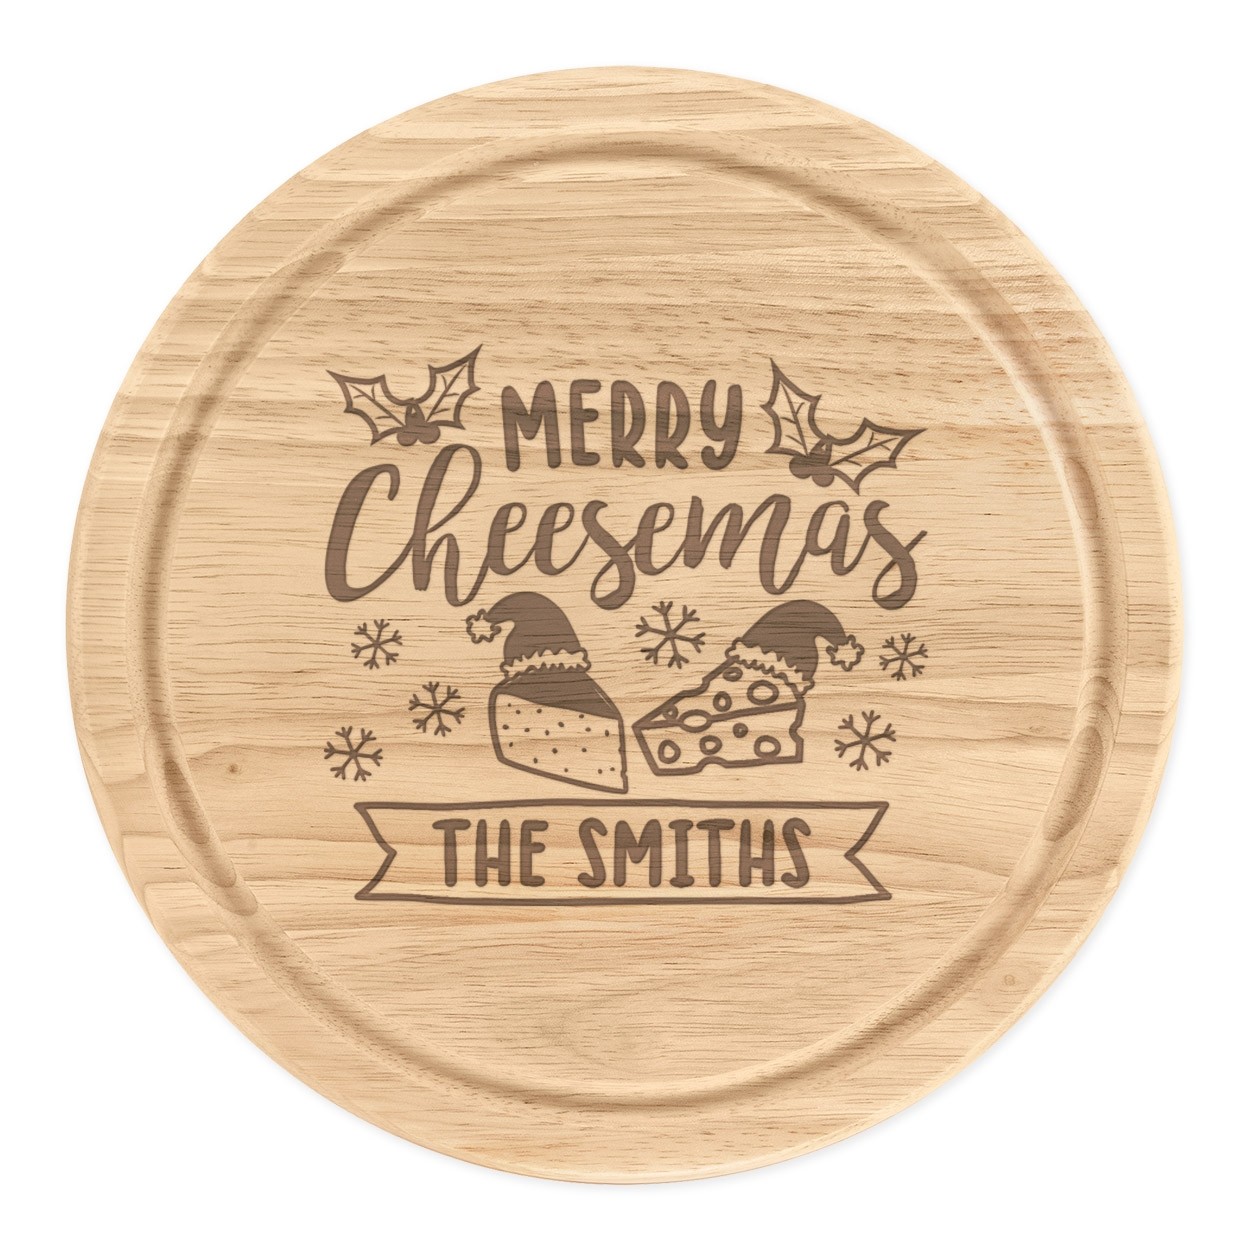 Personalised Merry Cheesemas Christmas Cheese Board Round 25cm Wooden Chopping